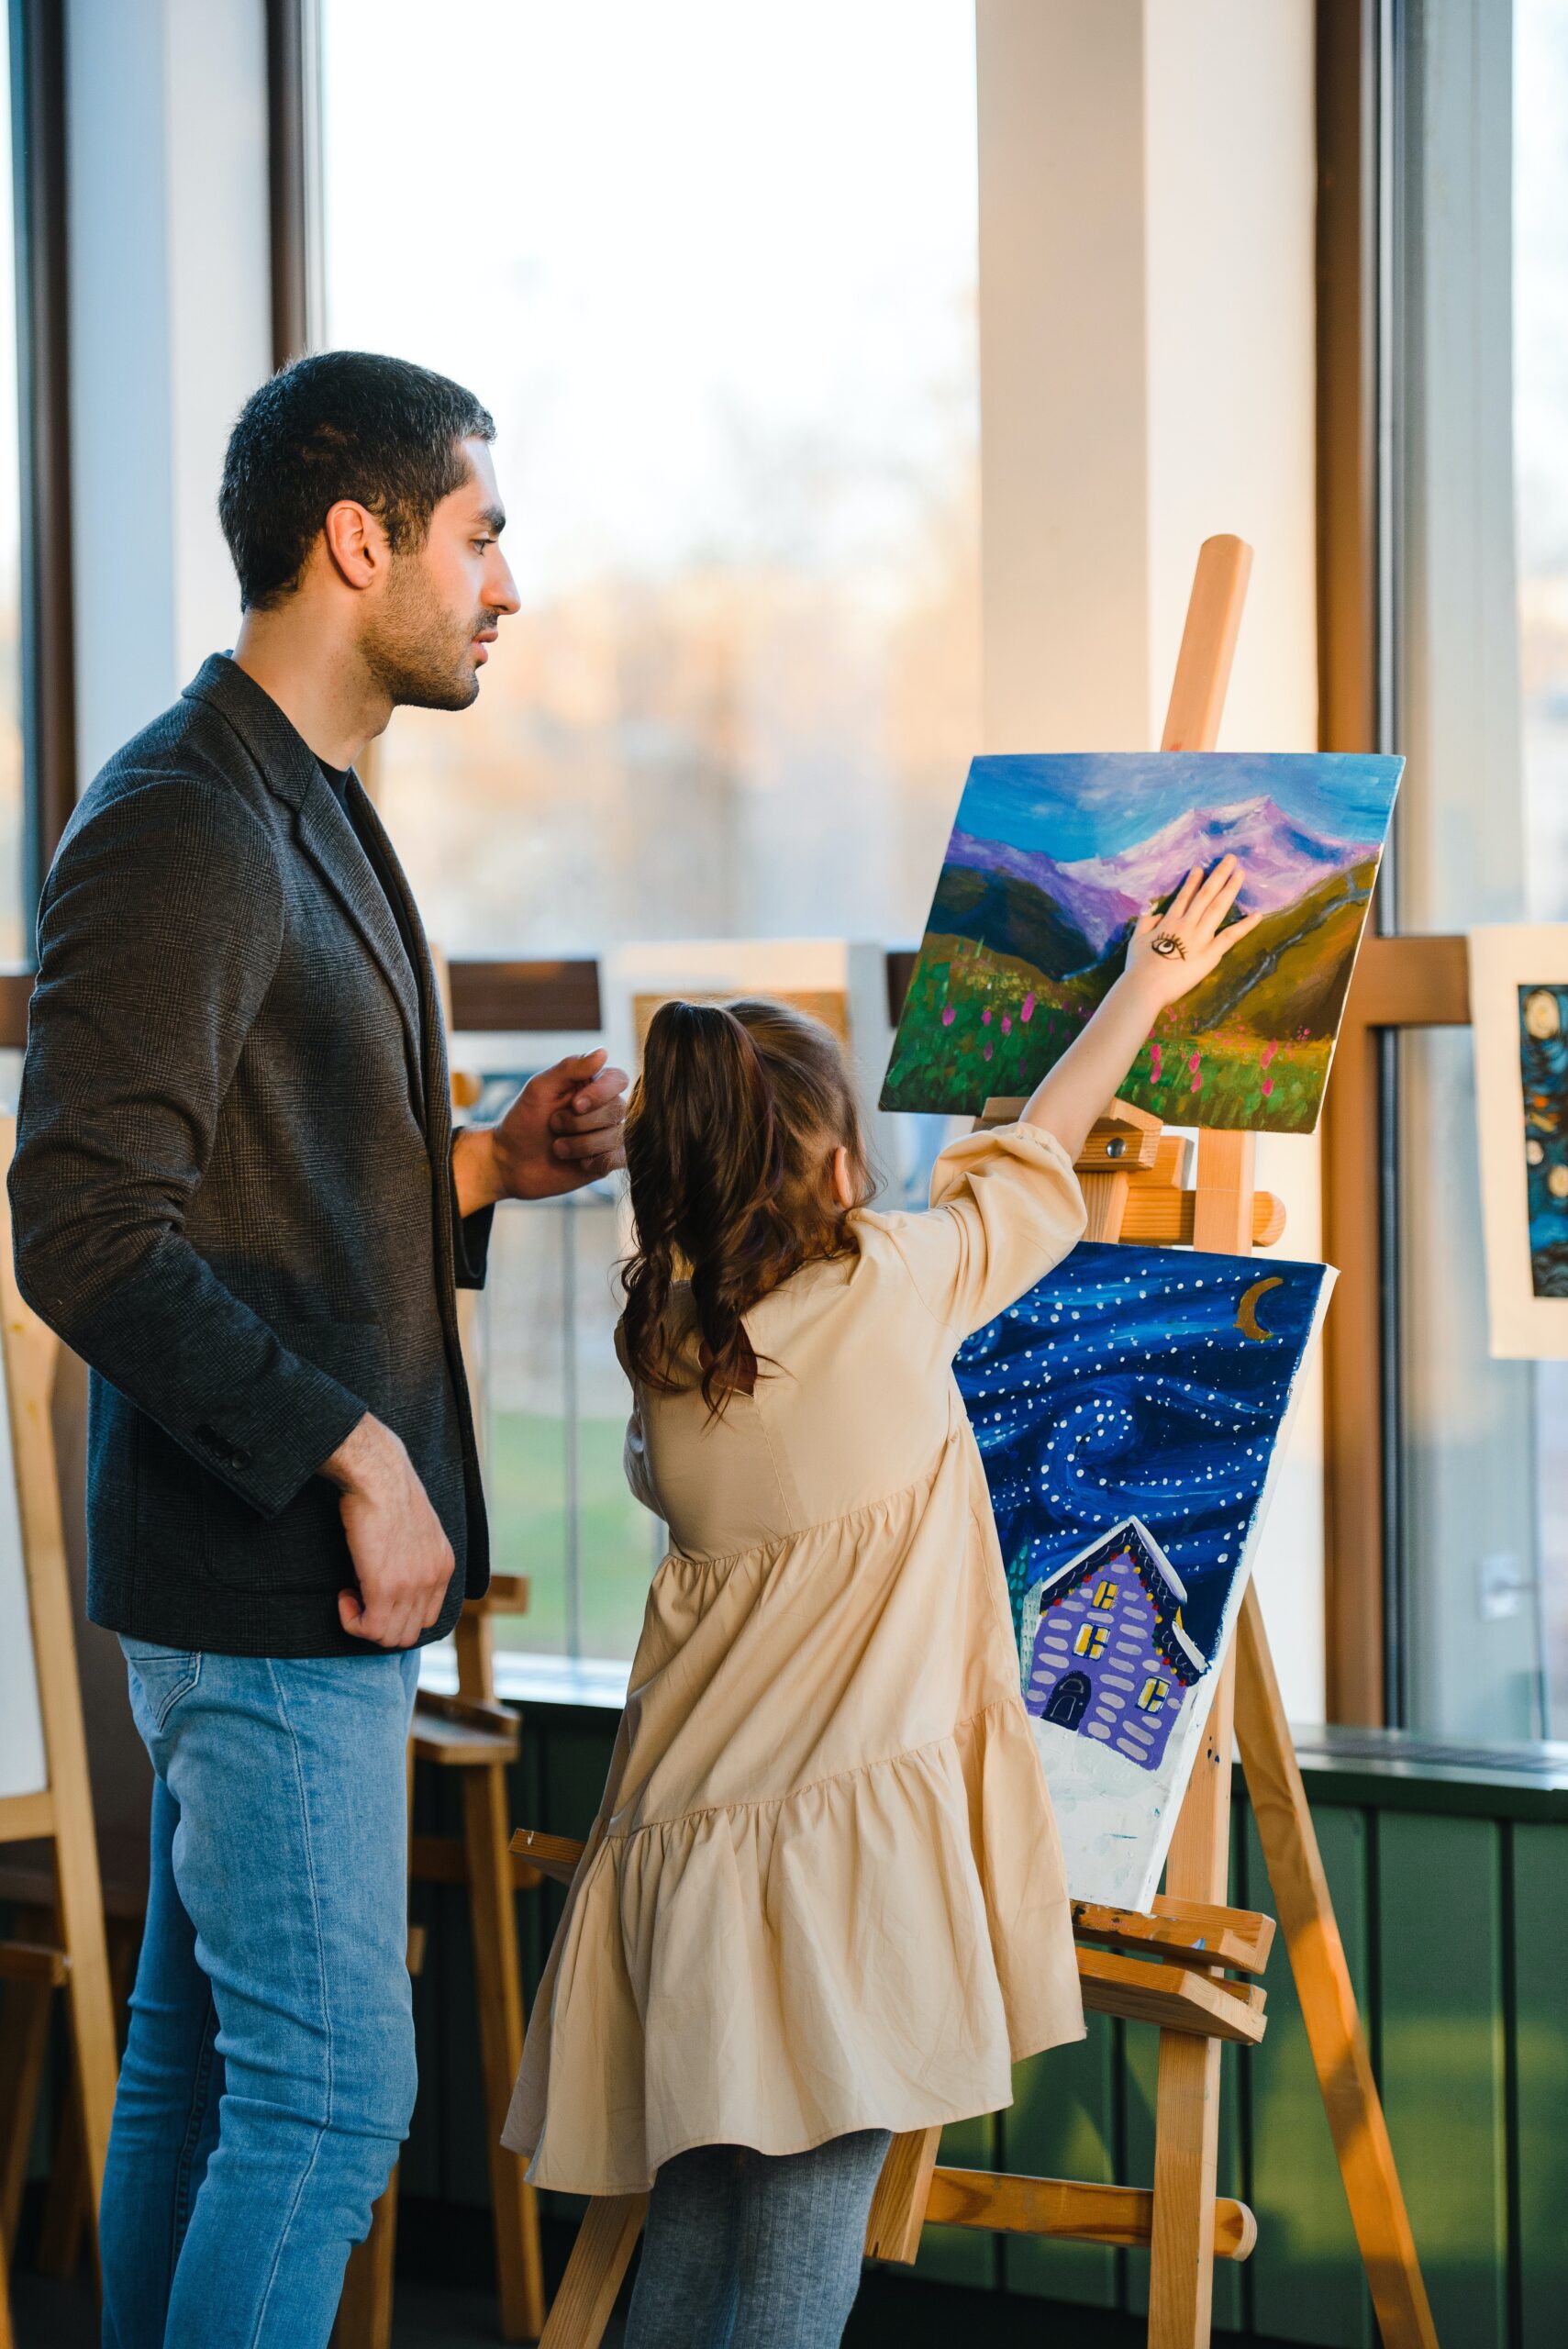 A teacher looking over a child’s painting image